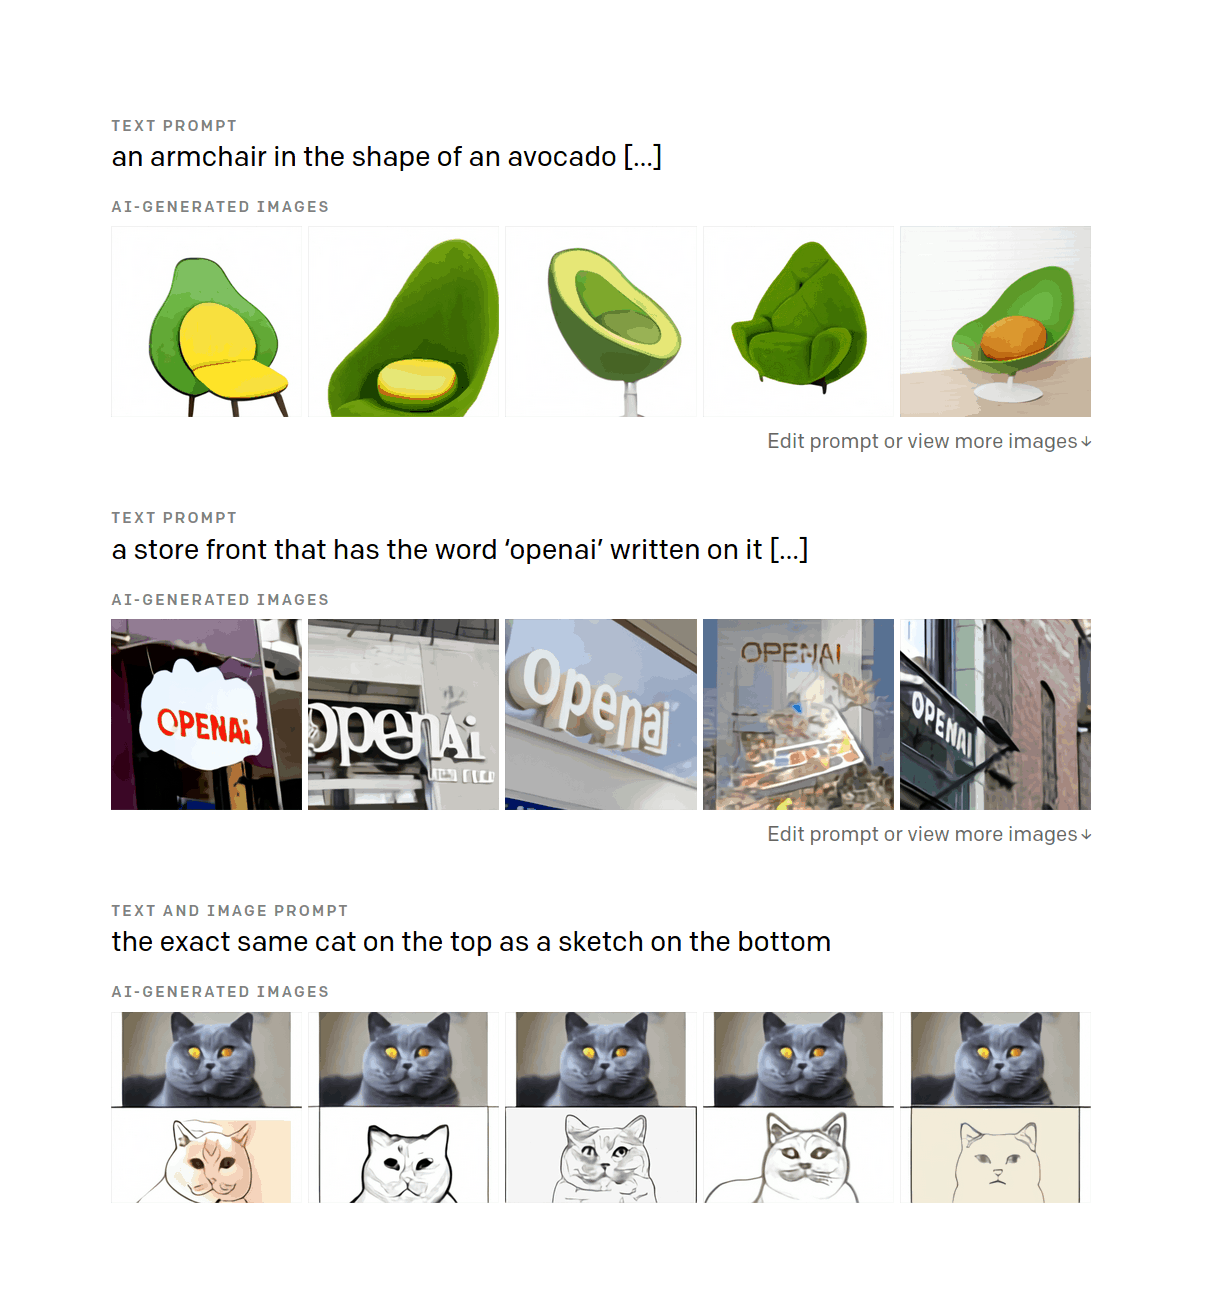 [3 DALL·E 1 prompts: “an armchair in the shape of an avocado…” · “a store front that has the word ‘openai’ written on it…” · “the exact same cat on the top as a sketch on the bottom”]